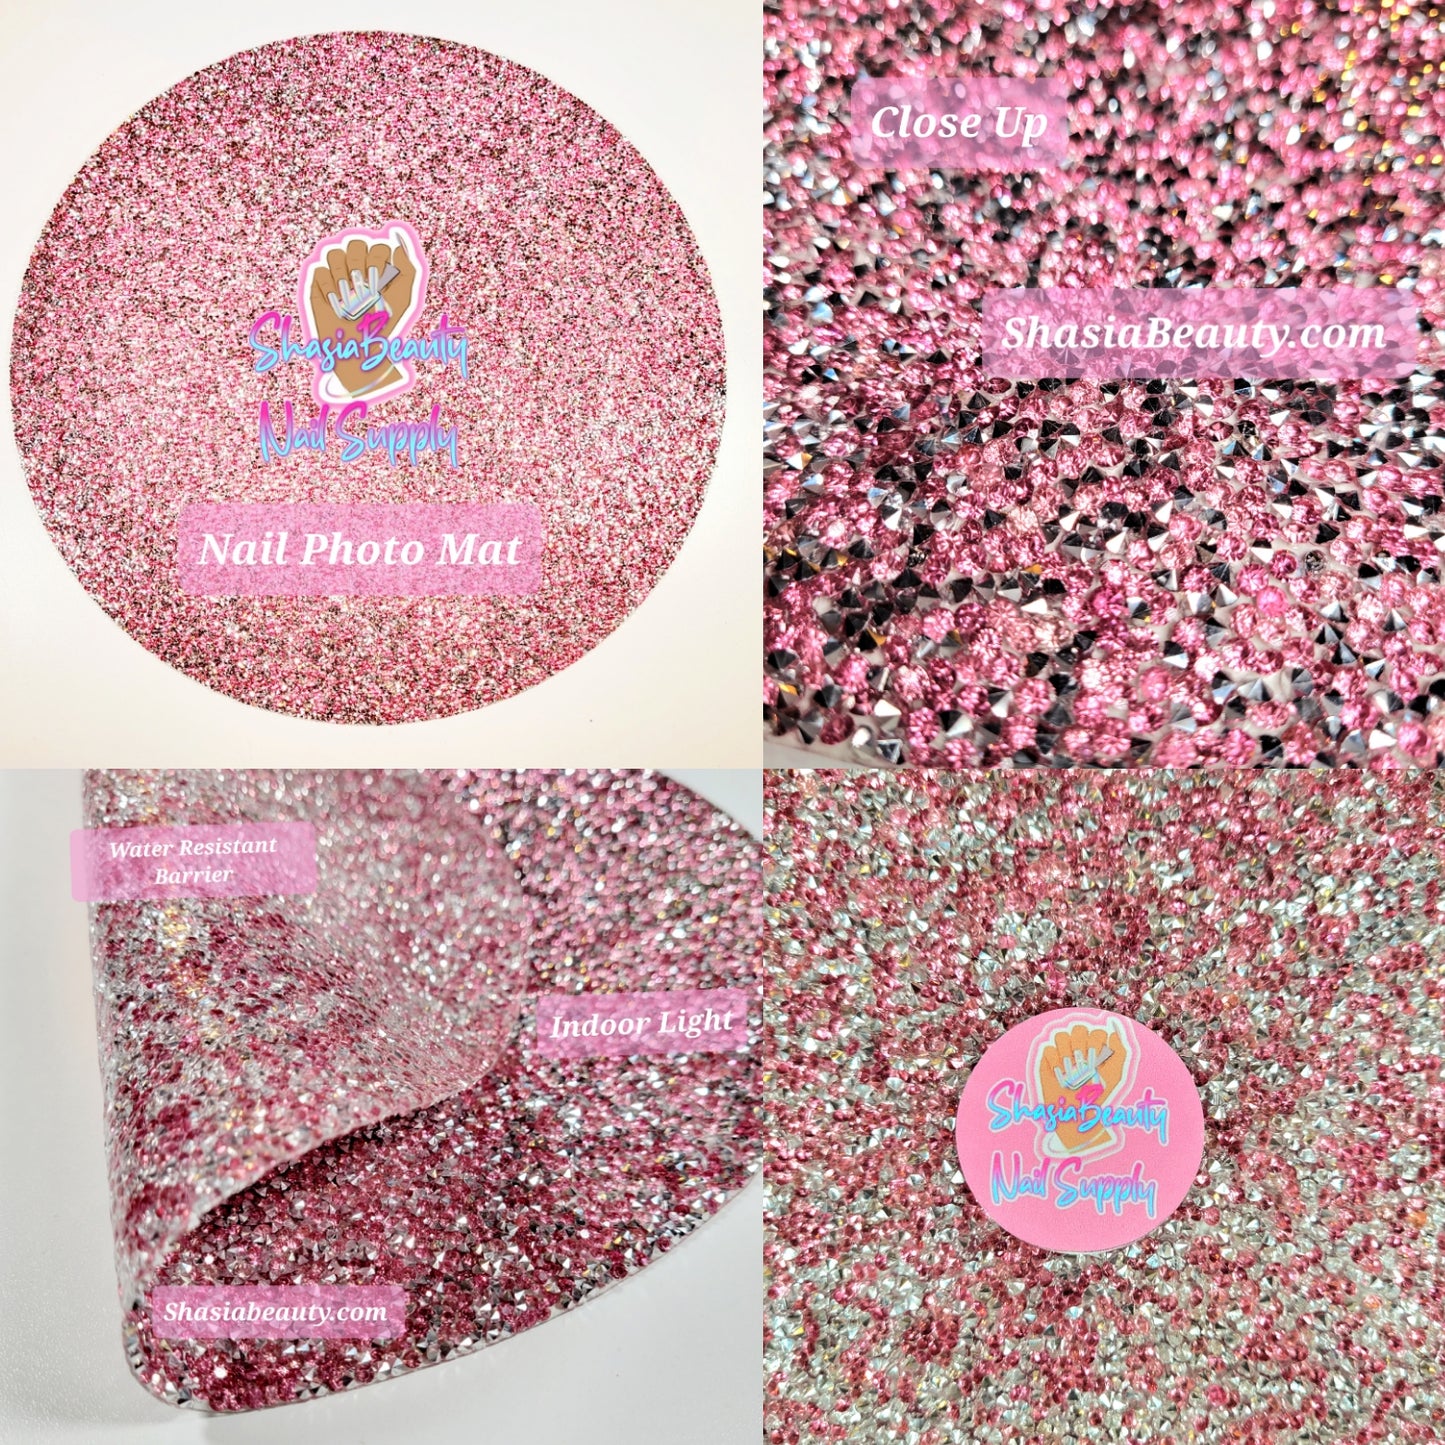 Perfect Pink Bling Nail Mats for Pictures